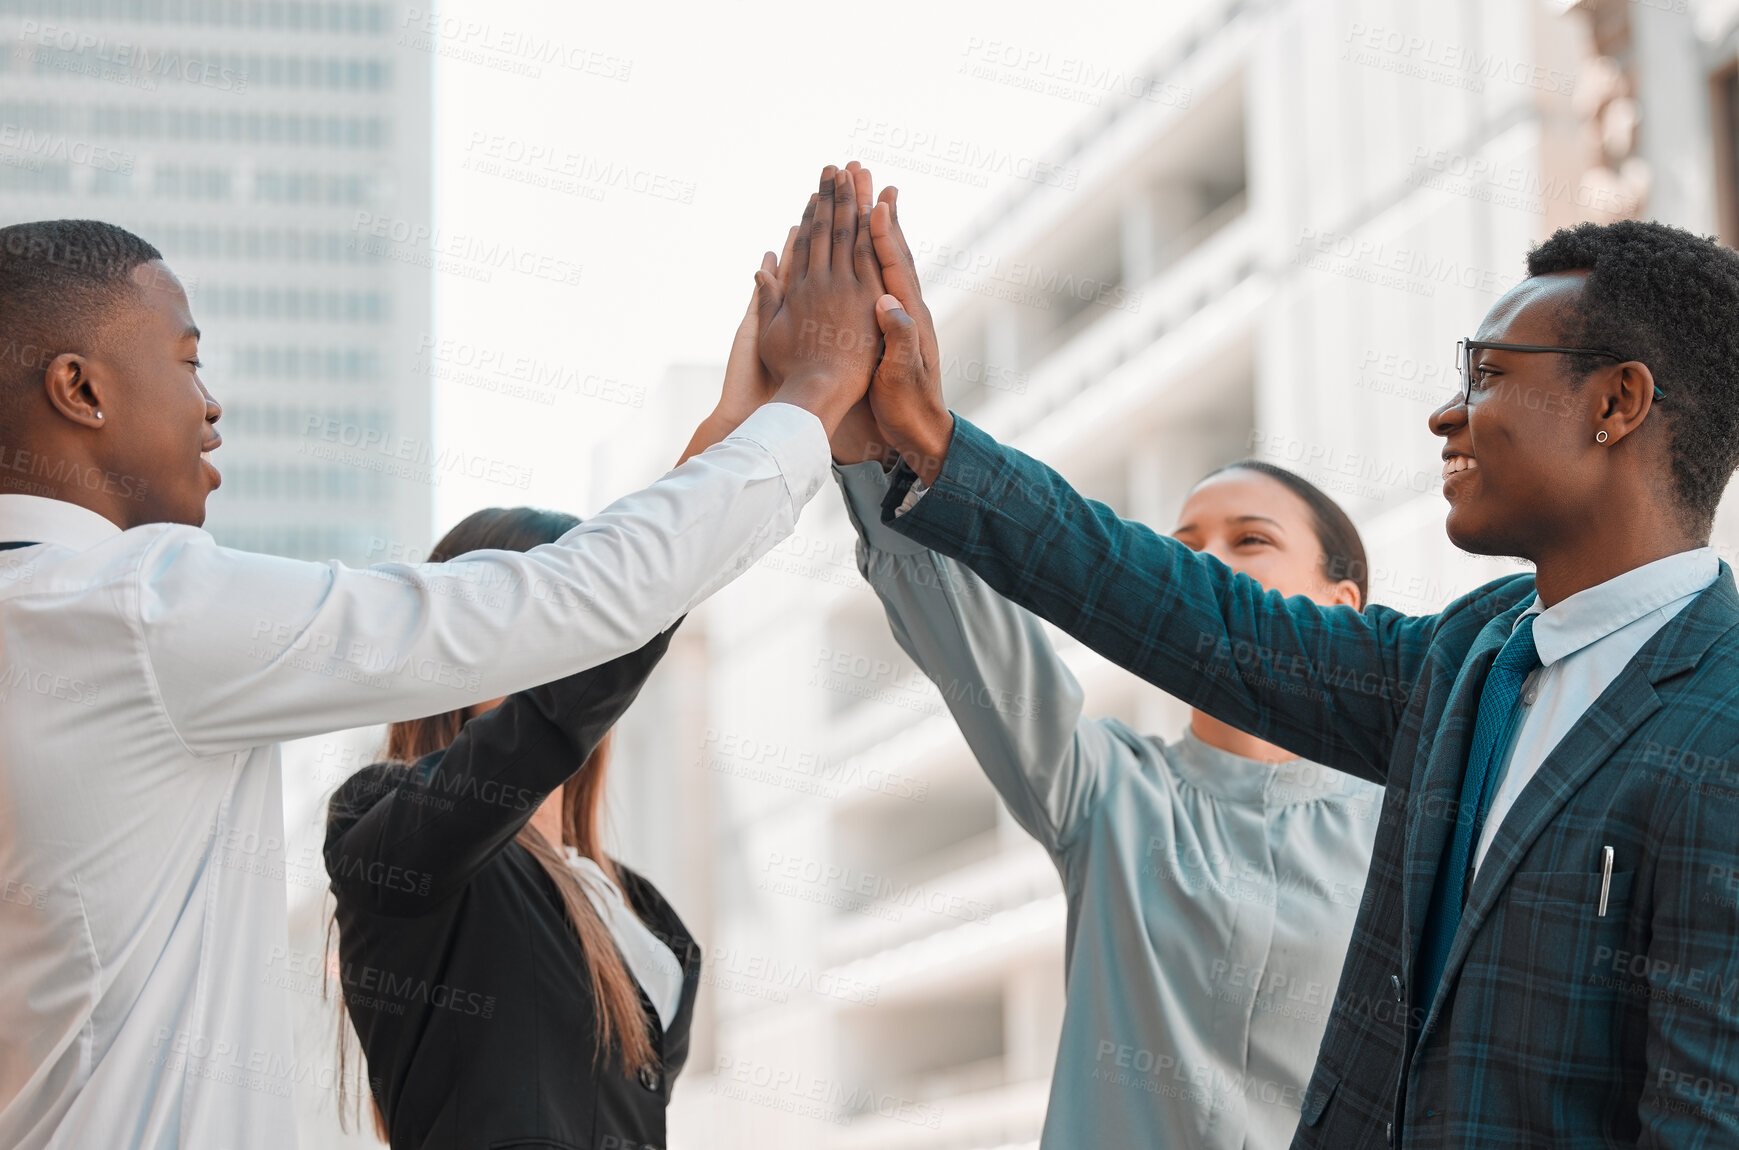 Buy stock photo Shot of a group of businesspeople giving each other a high five in the city